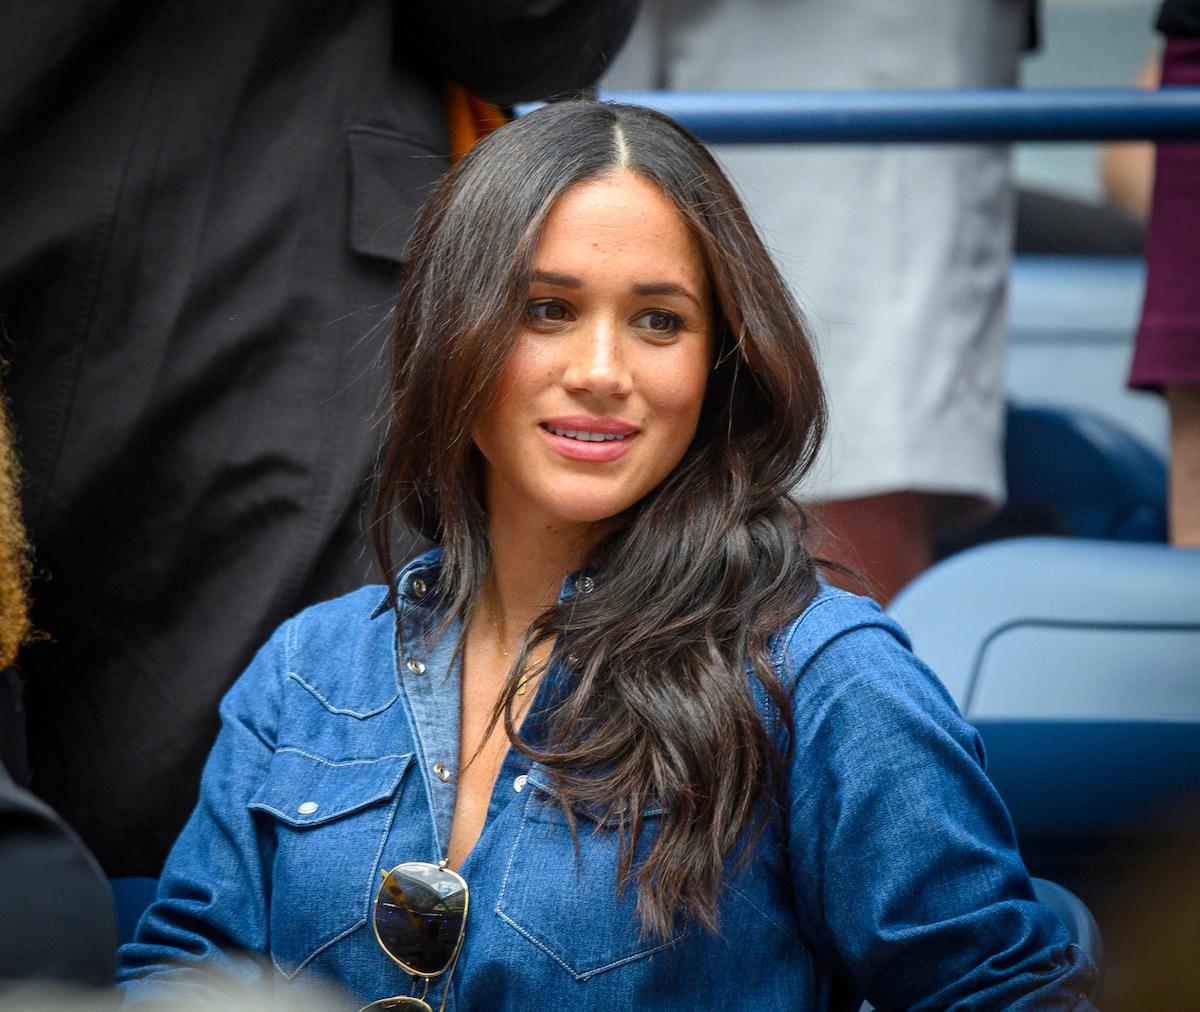 Meghan Markle, Duchess of Sussex was in Serena Williams' box during the Williams match against Bianca Andreescu of Canada